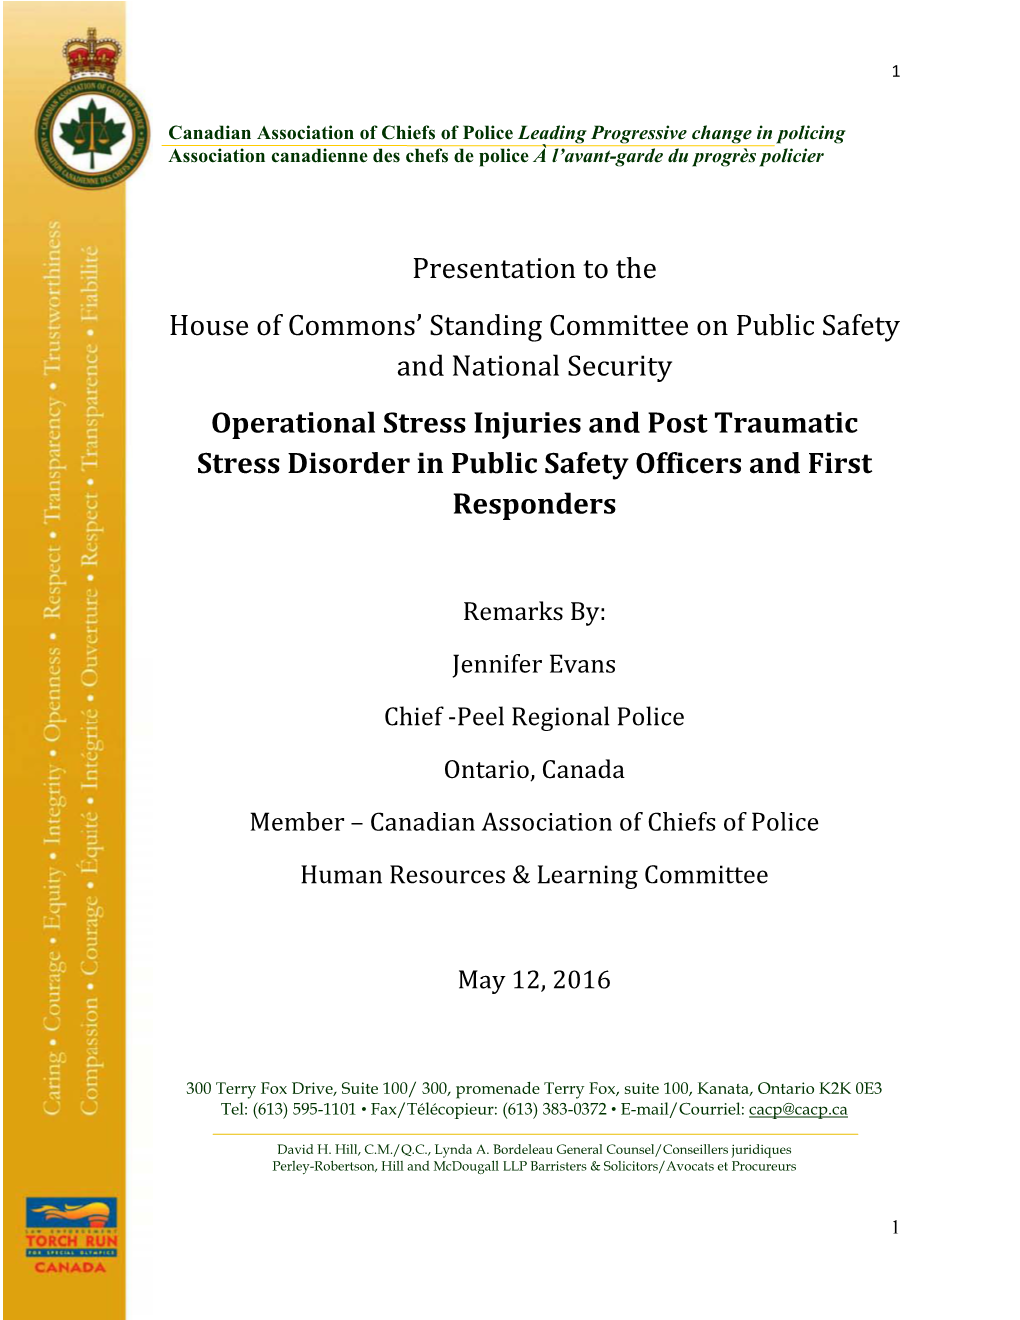 Presentation to the House of Commons' Standing Committee On